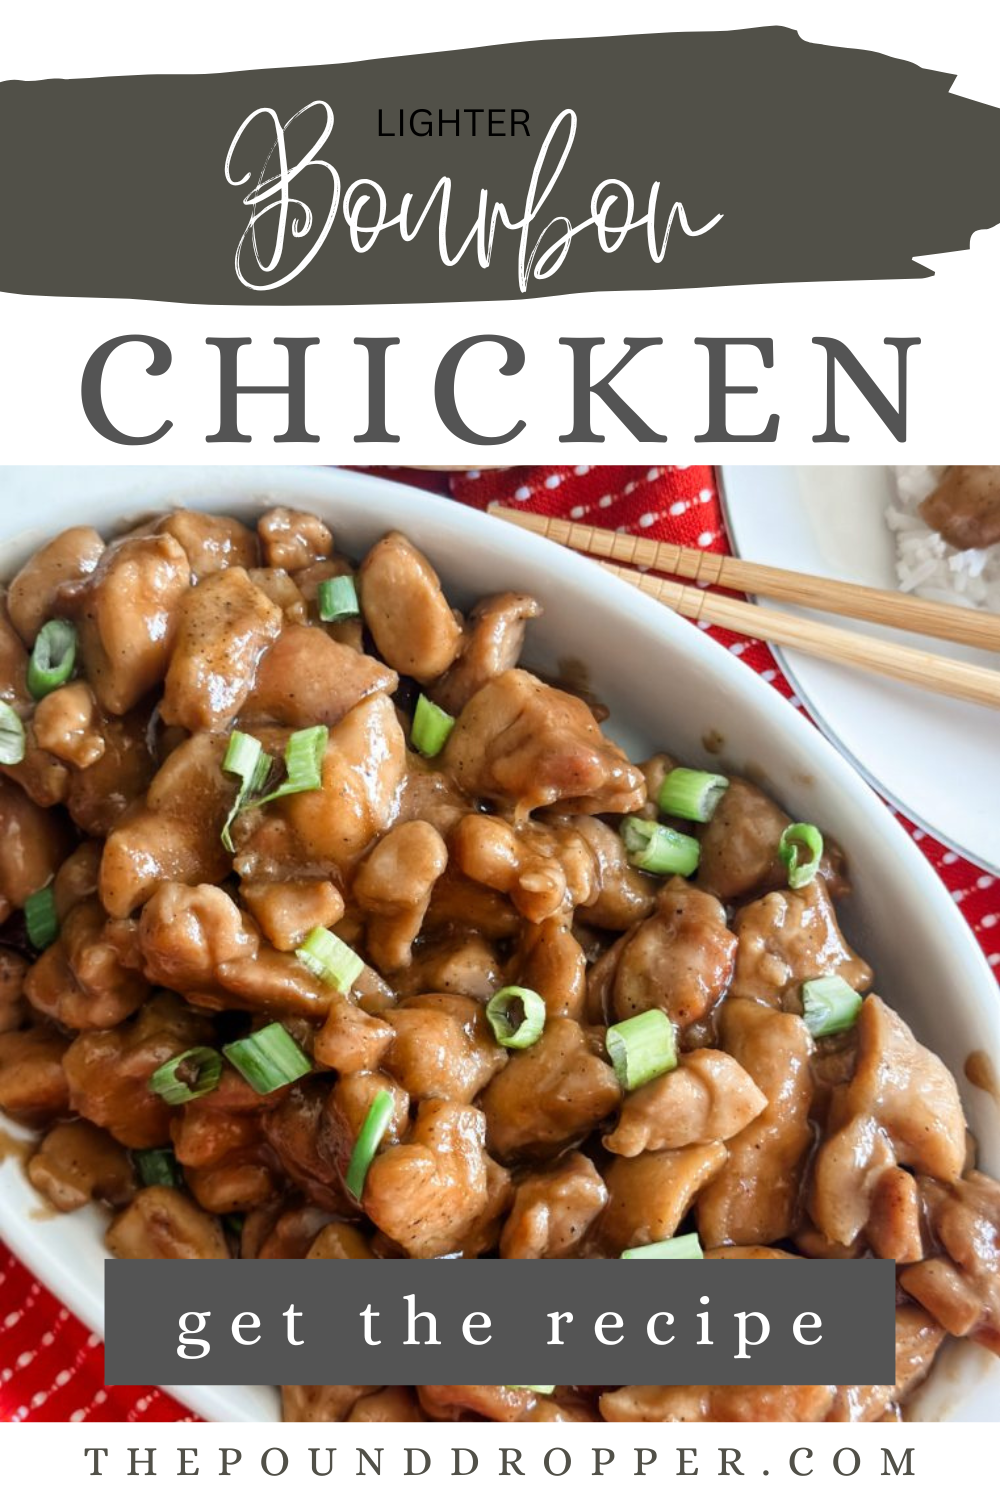 This Lighter Bourbon Chicken is made with tender chicken thighs smothered in a lightened up sticky bourbon sauce! This restaurant-worthy chicken dish can be made in less than 30 minutes! Packed with protein and perfect for those busy weekday nights!   via @pounddropper